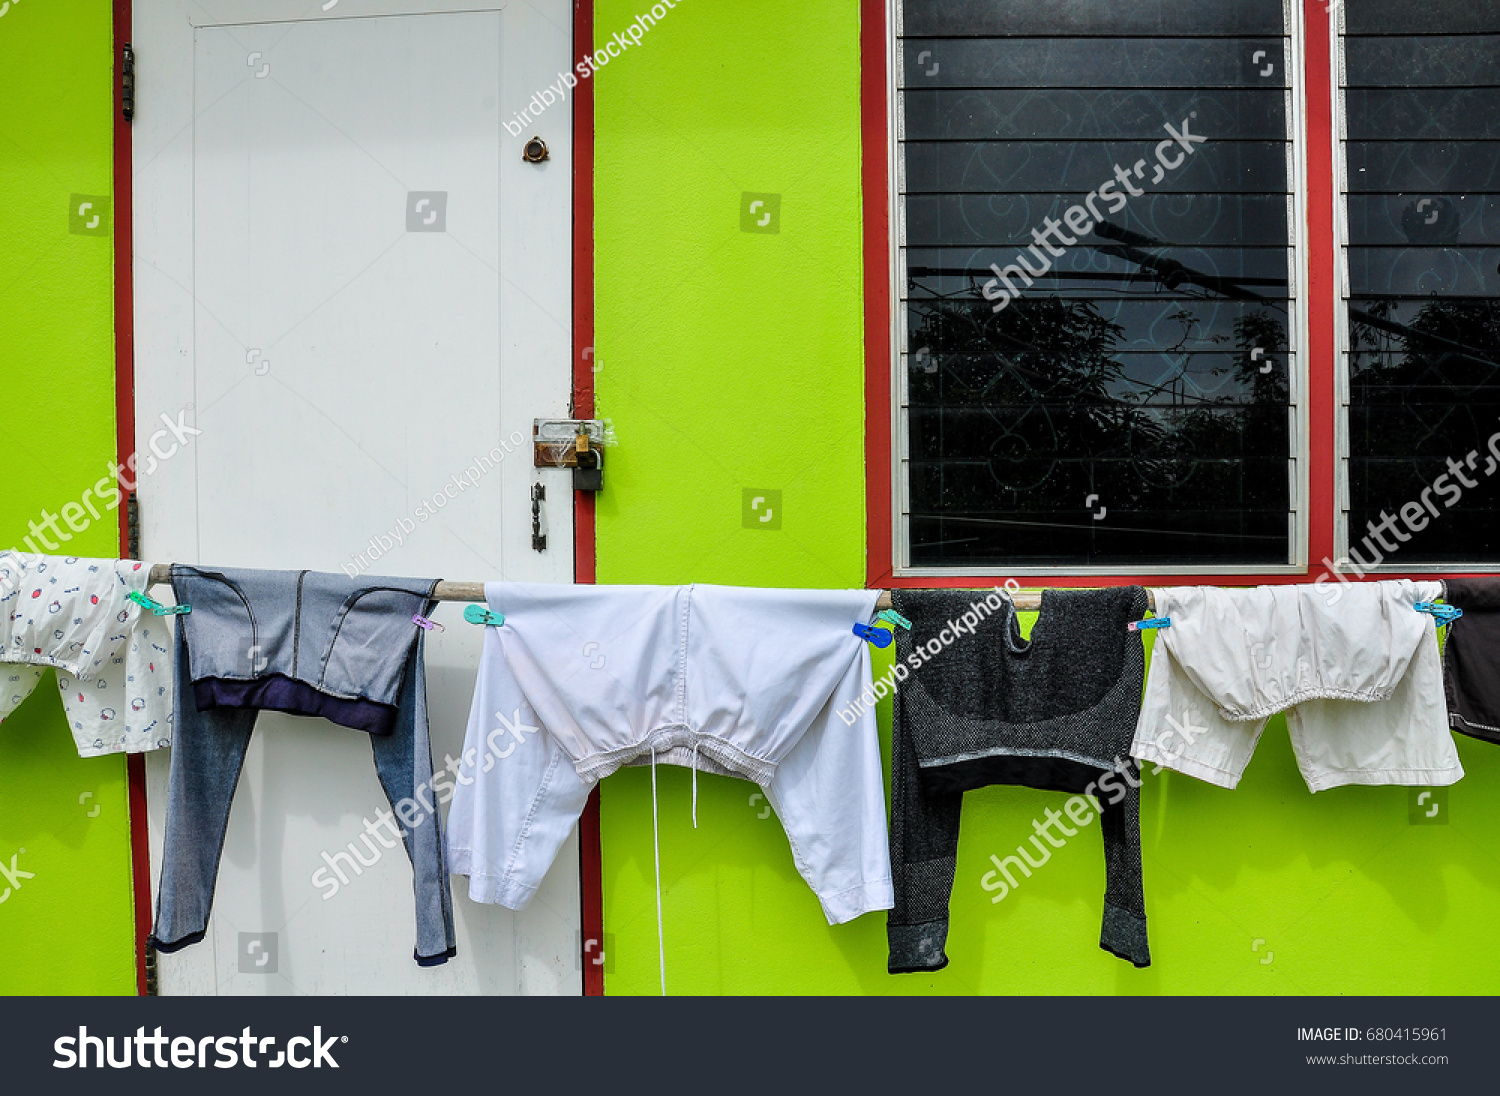 Clothes Rack Made Bamboo Pvc Pipe Stock Photo Edit Now 680415961